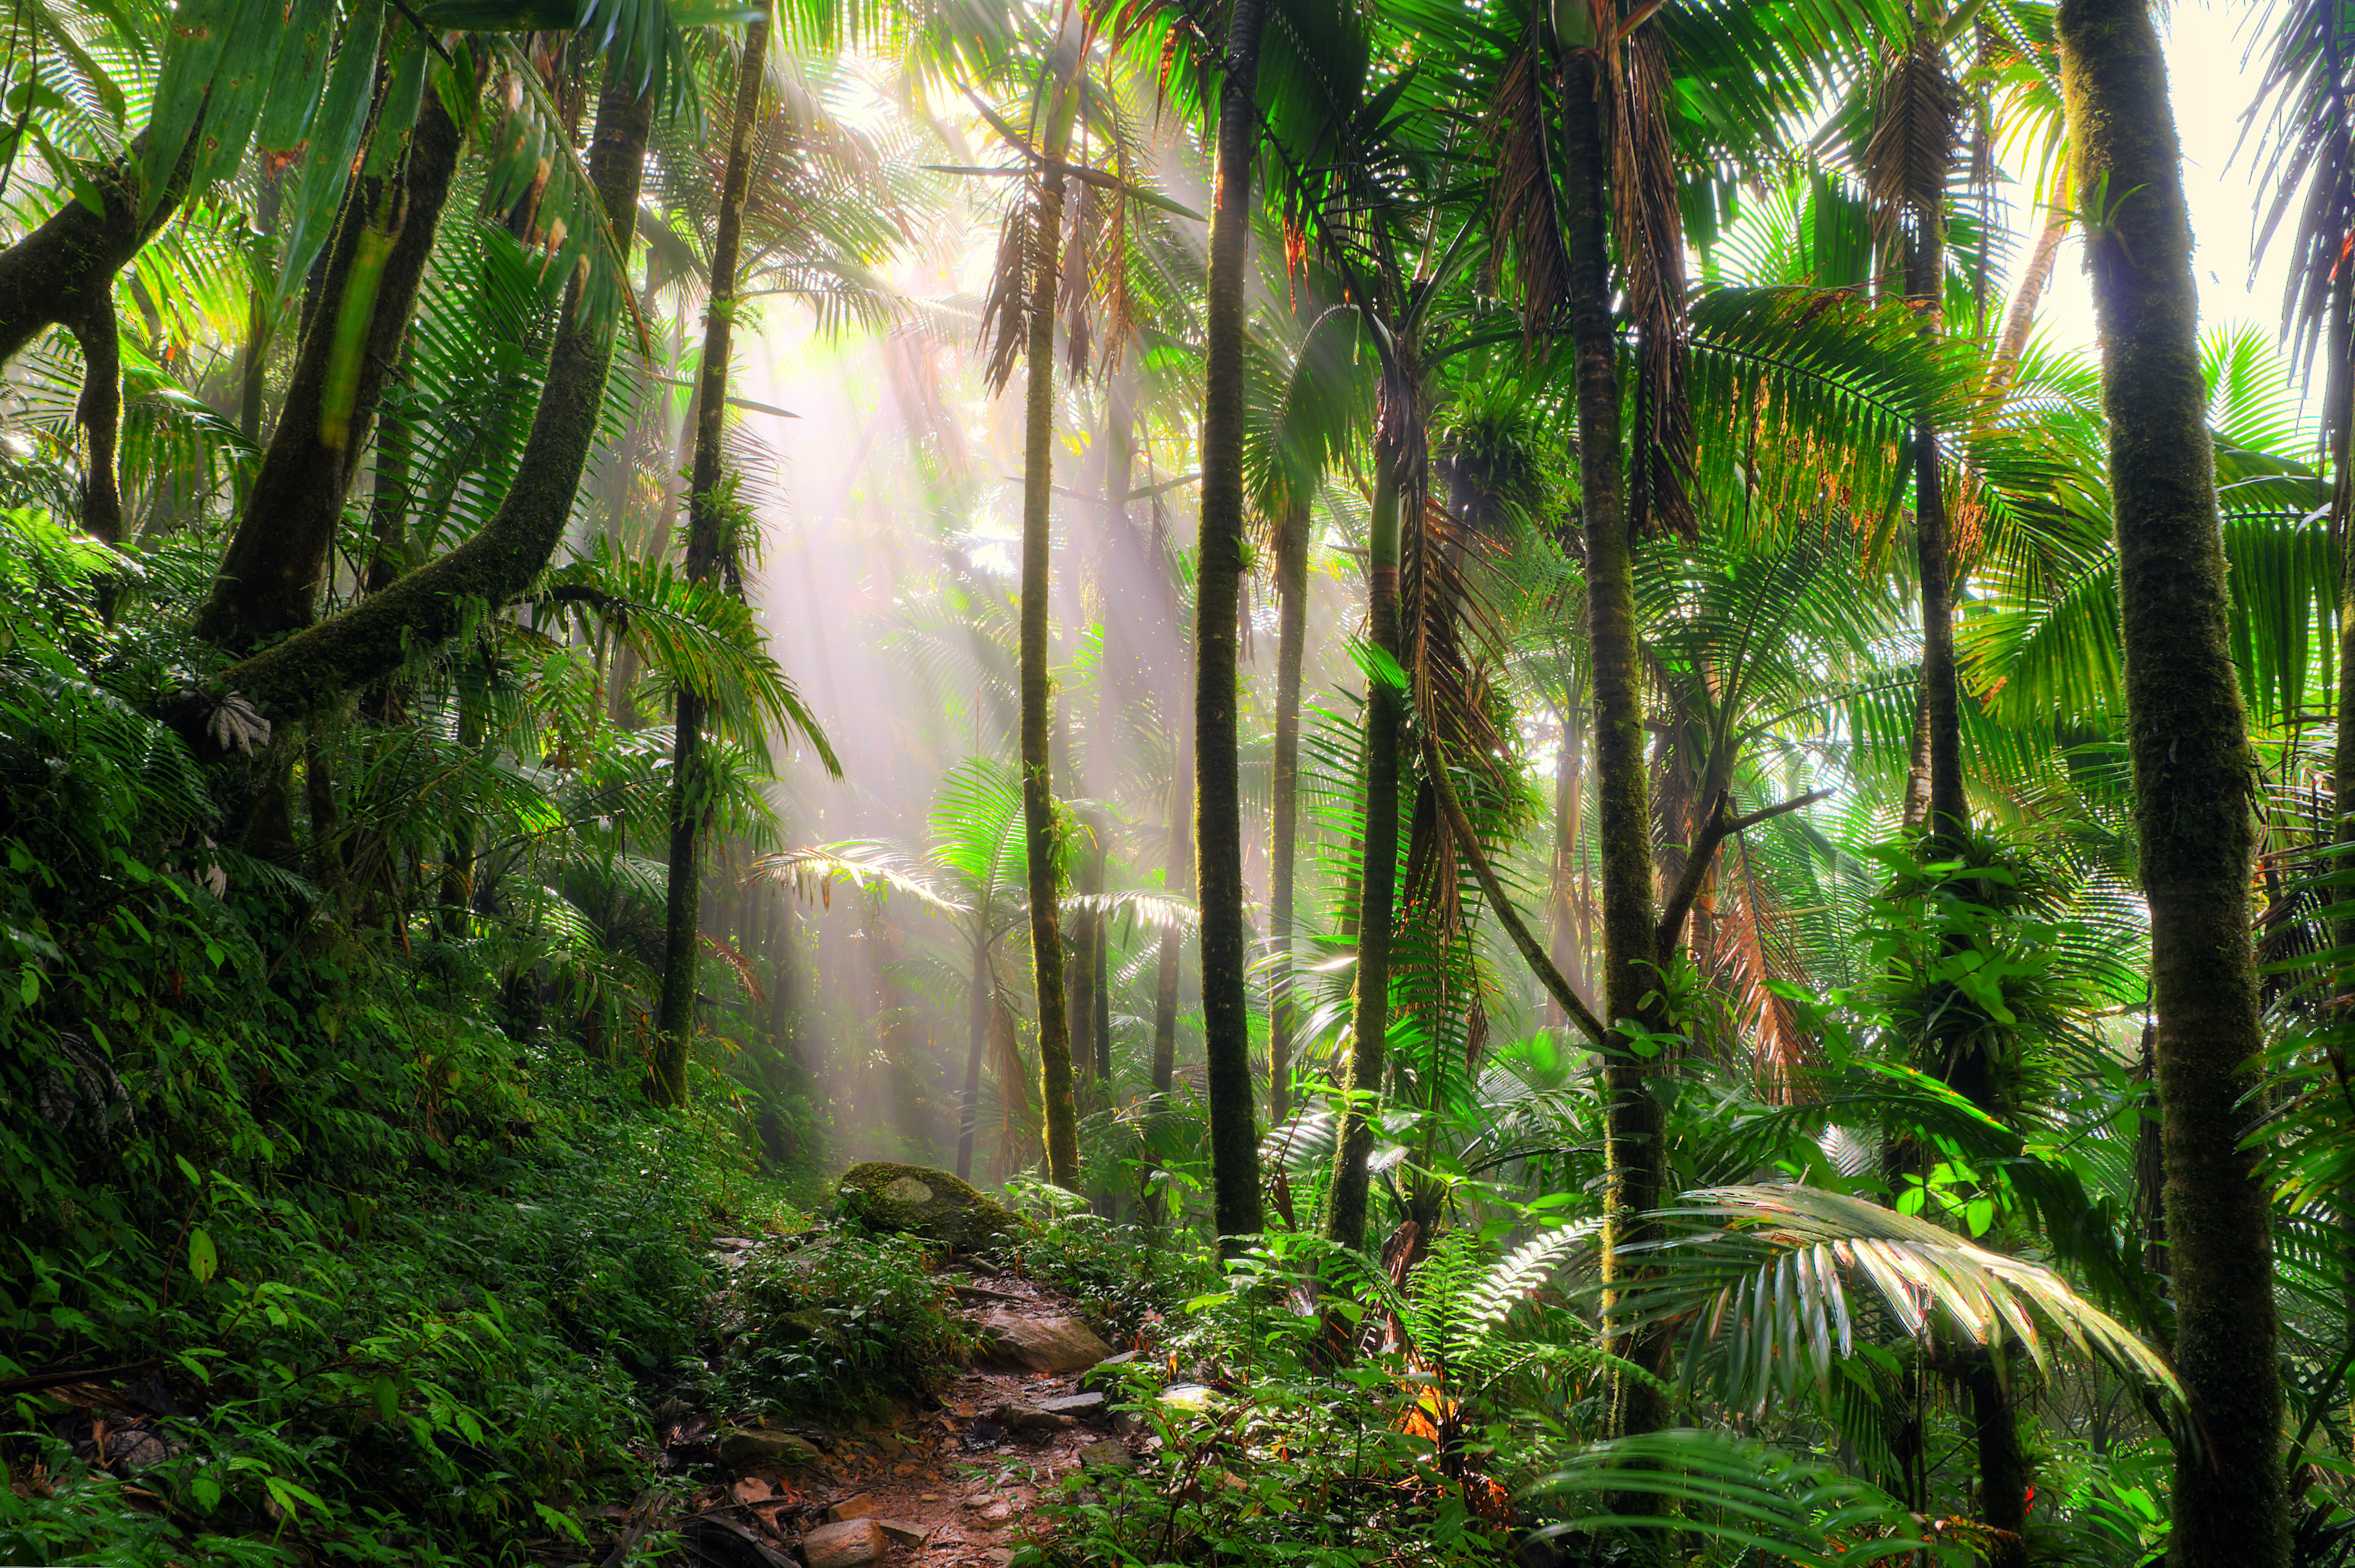 List of Plants in a Rainforest | USA Today